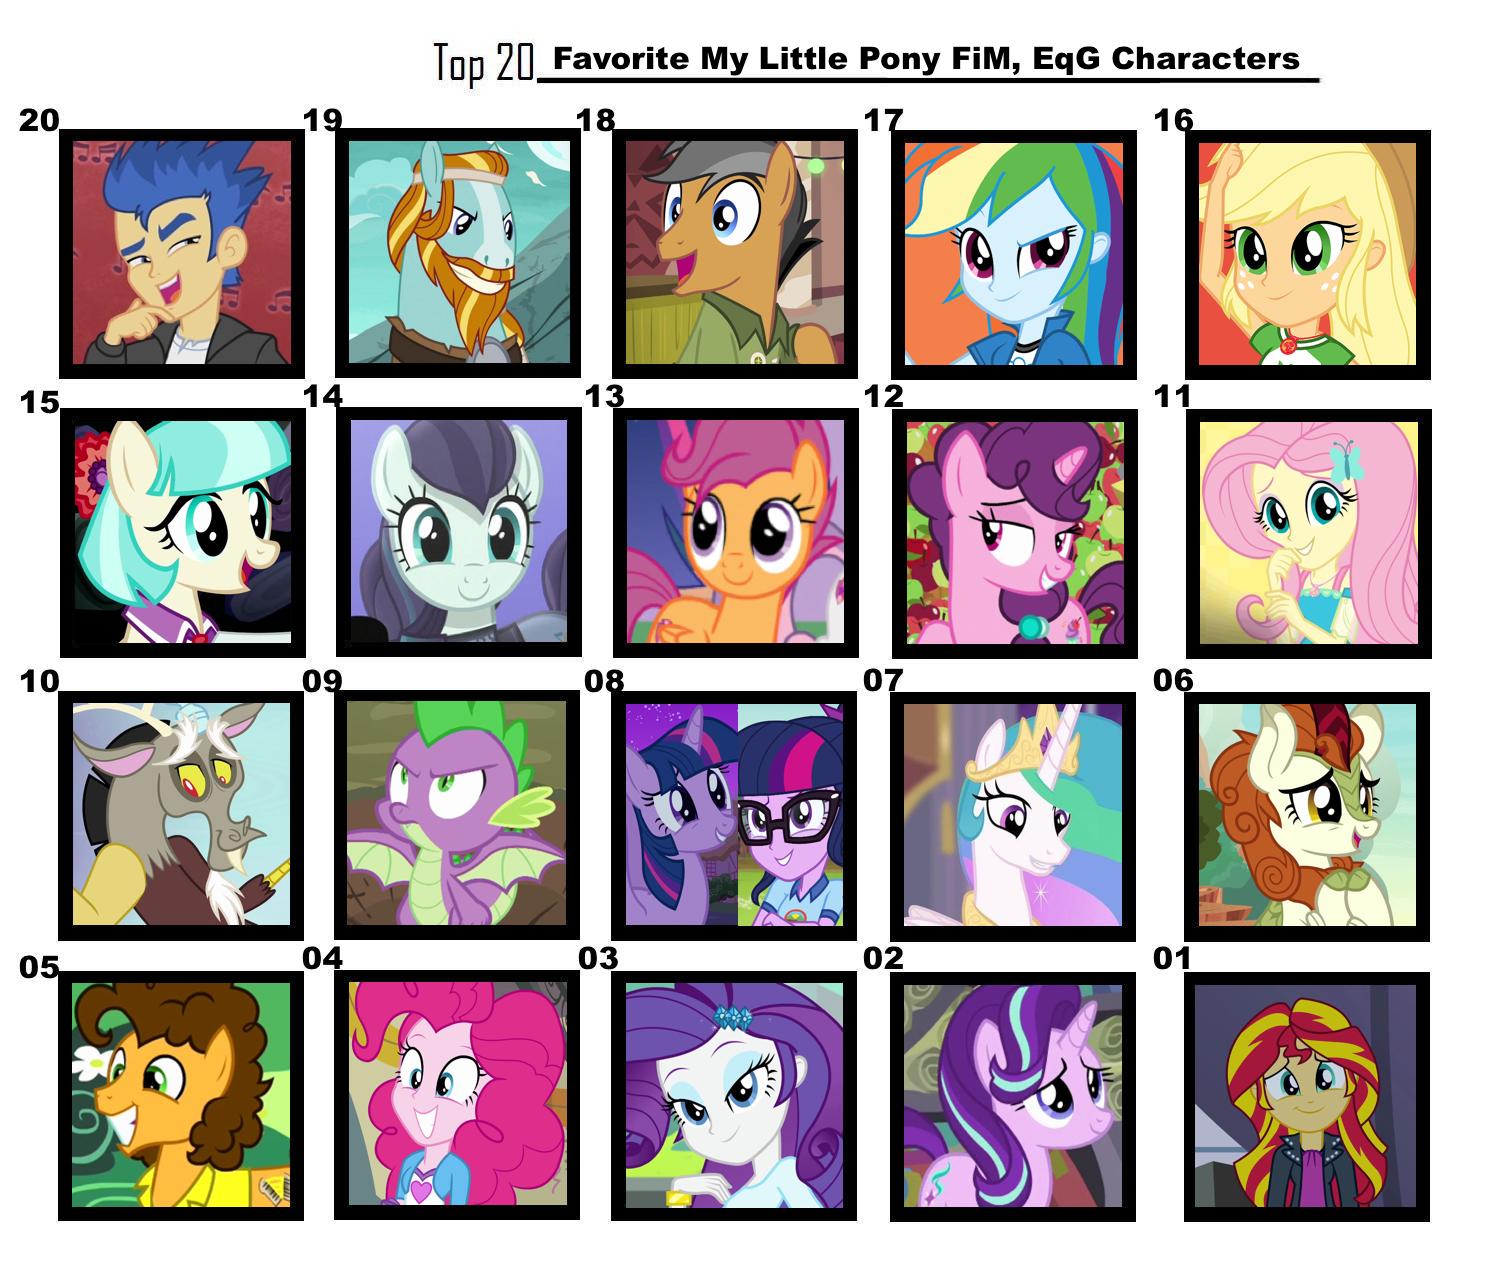 Top 10 My Little Pony Characters